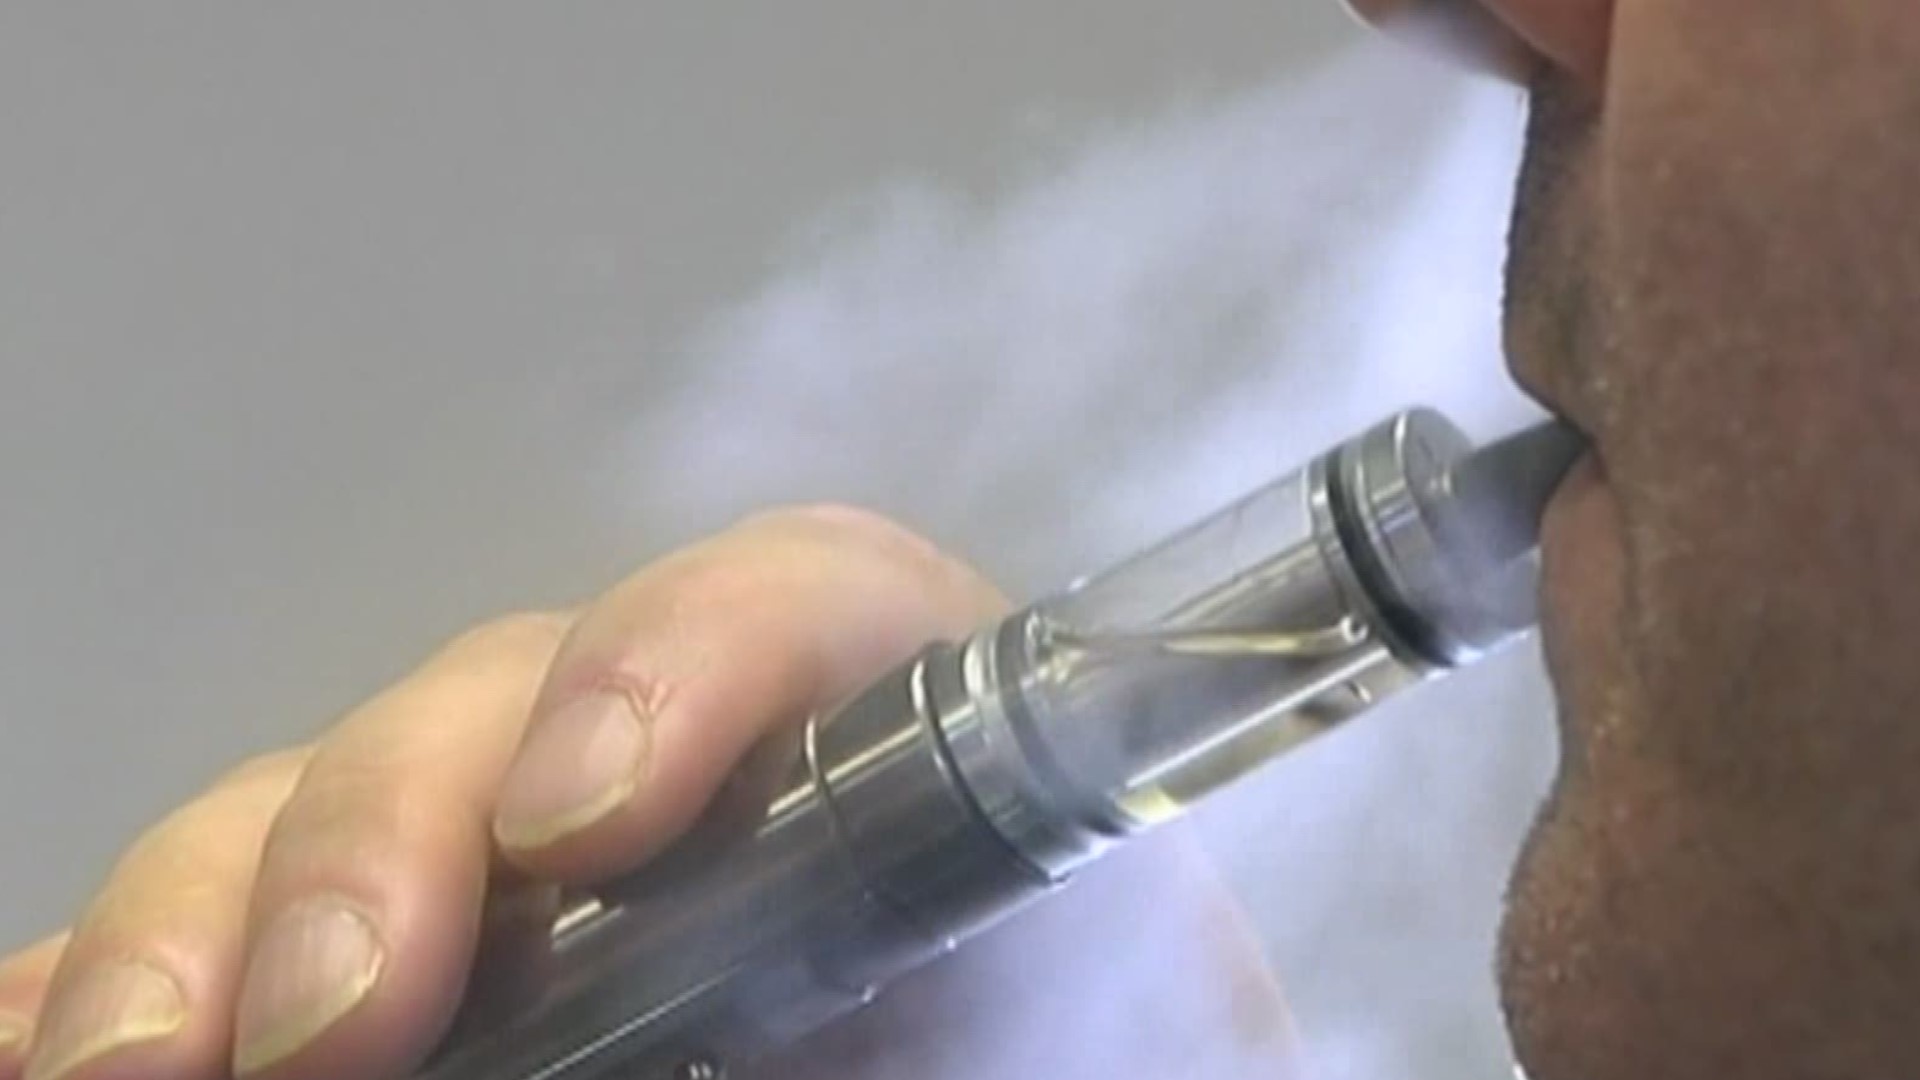 Safer doesn't always equal safe. Liza Lucas verifies the risks that comes with vaping.